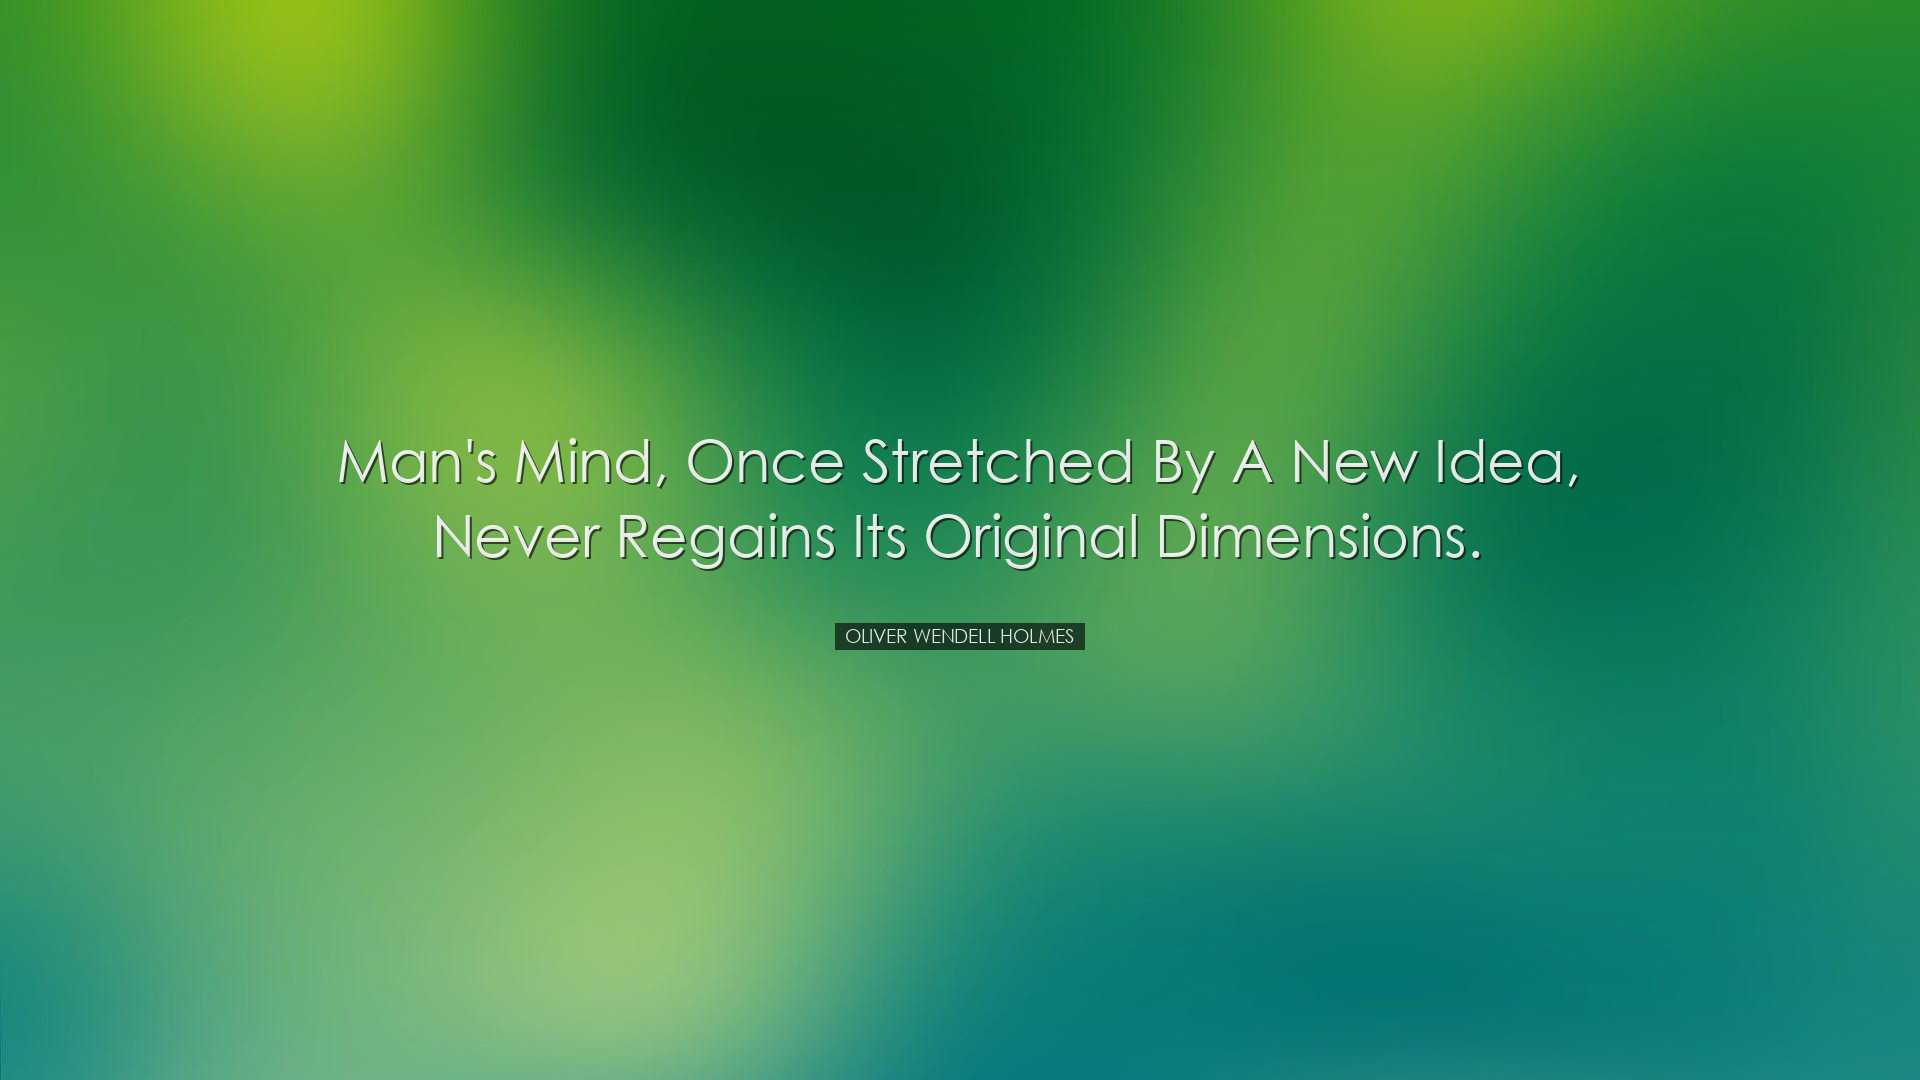 Man's mind, once stretched by a new idea, never regains its origin